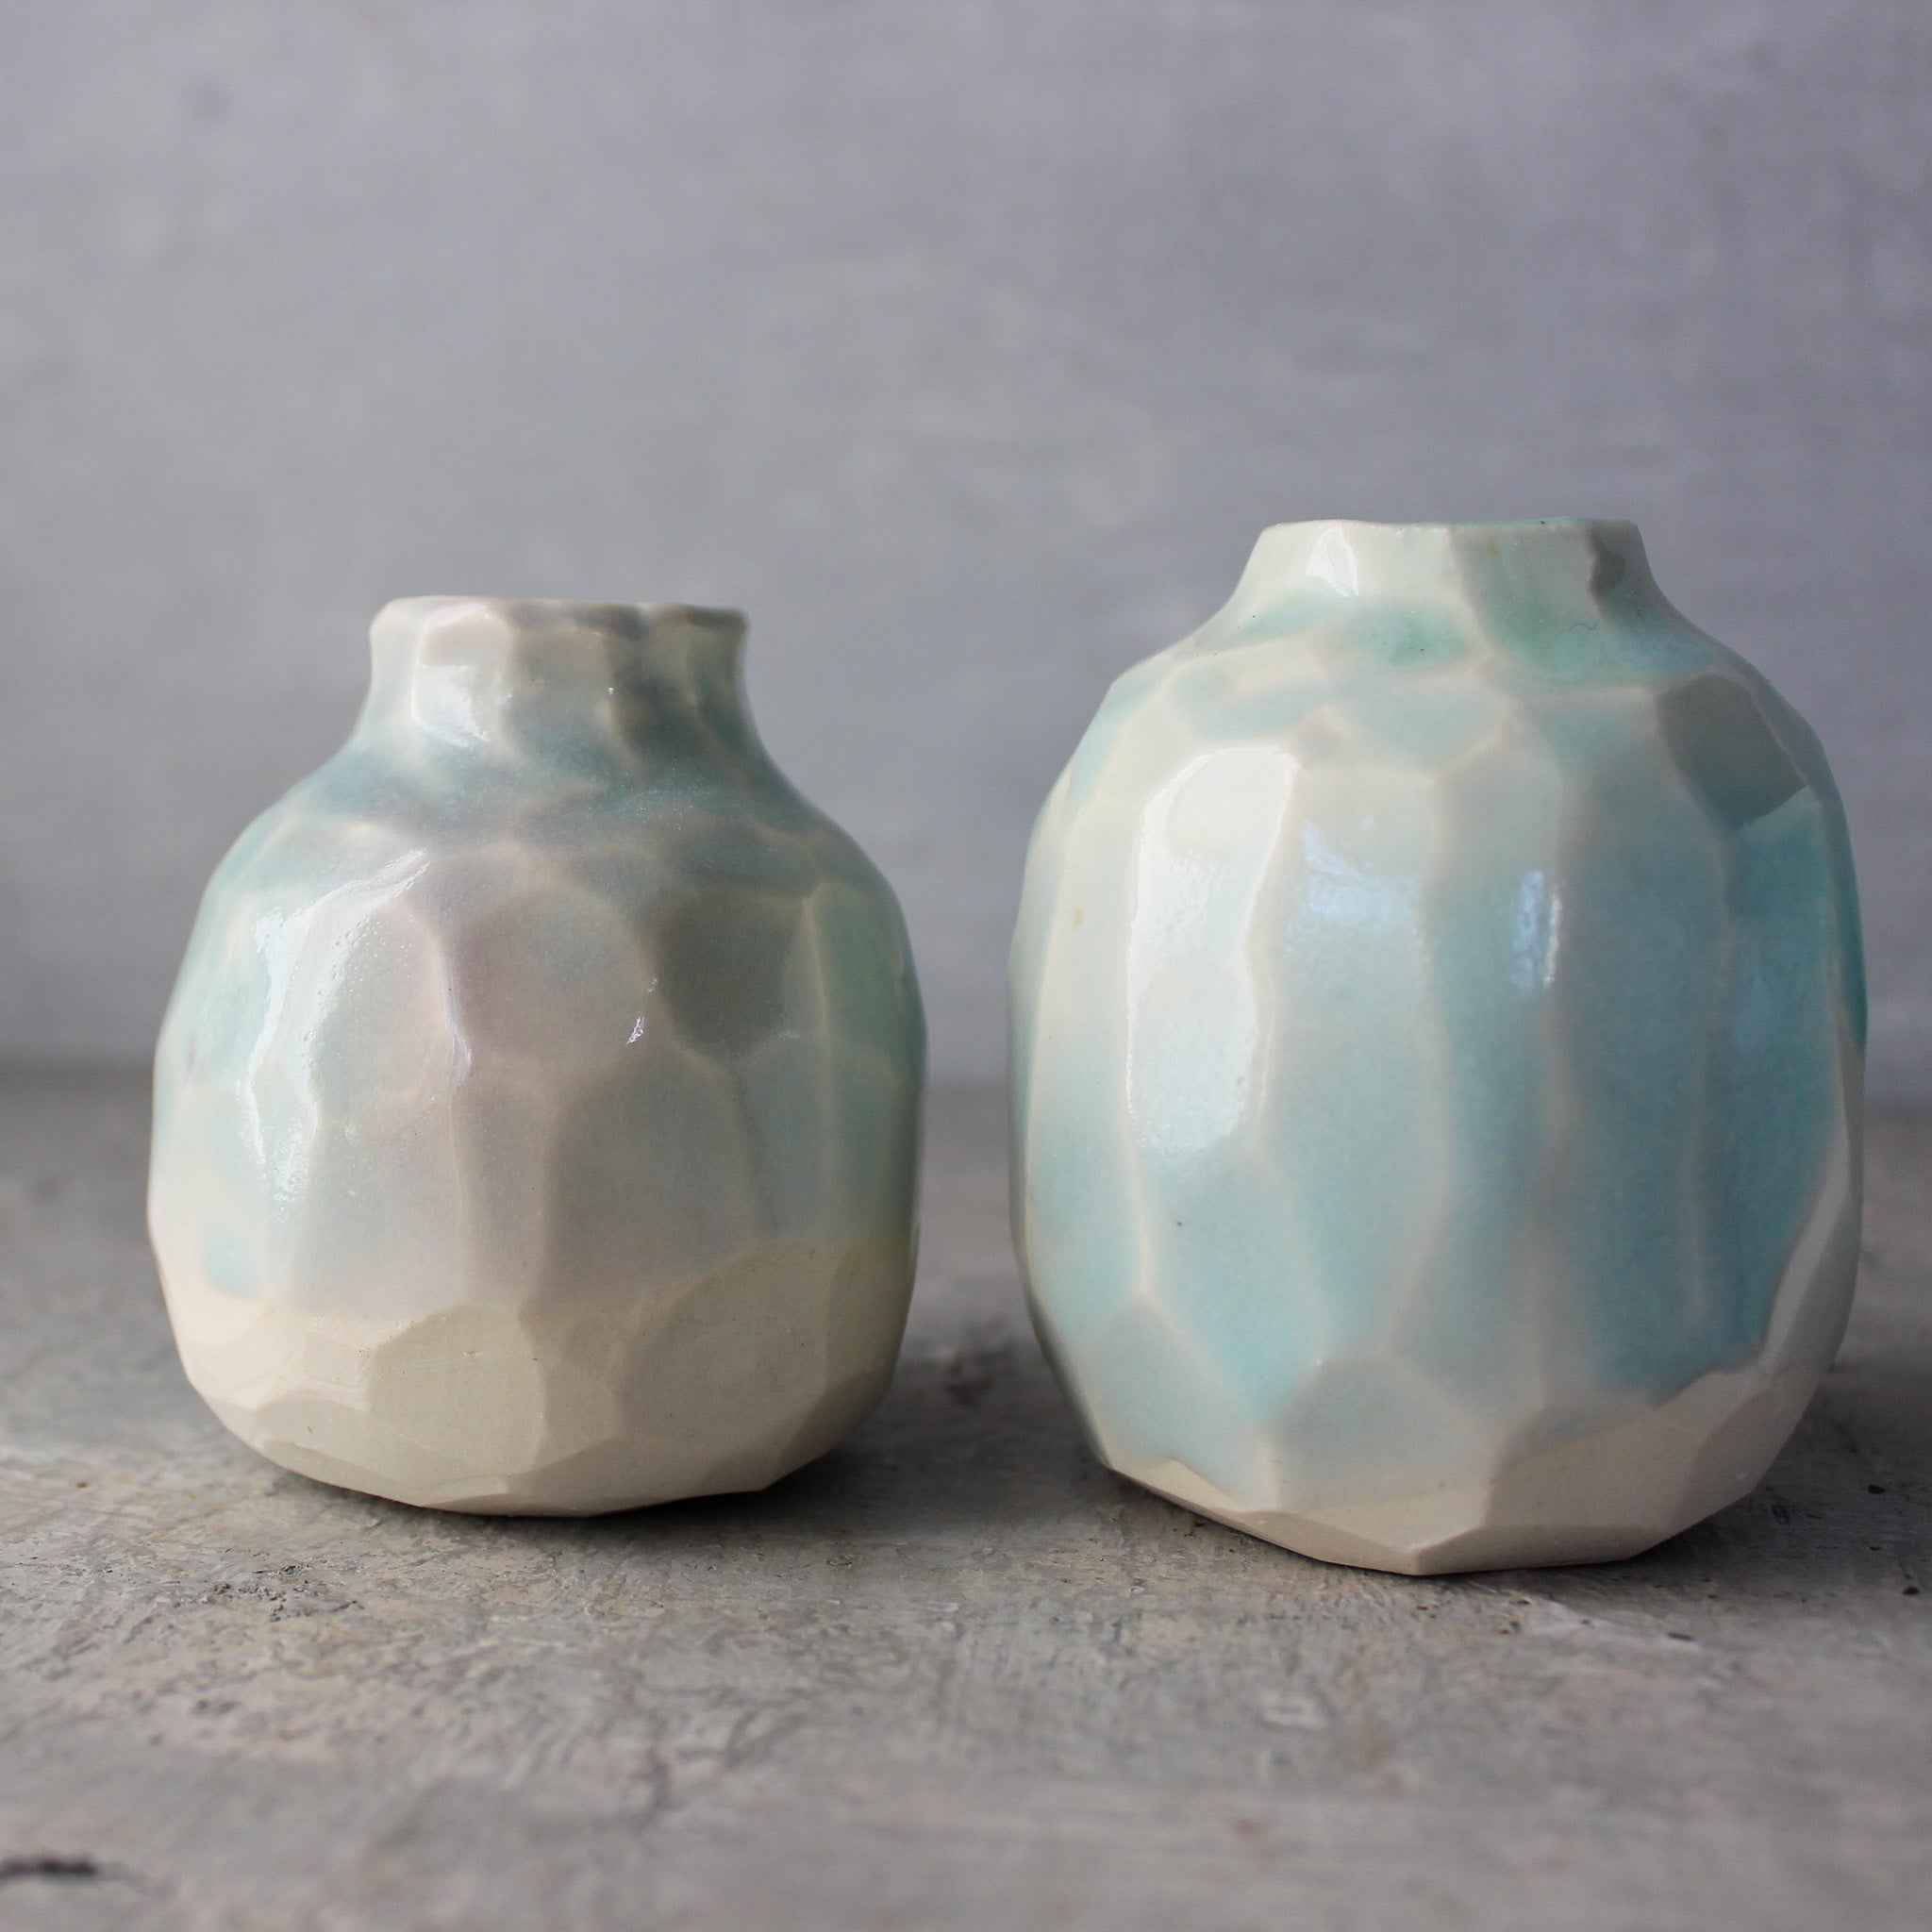 Faceted Porcelain Vases Powder Blue Collection - Tribe Castlemaine